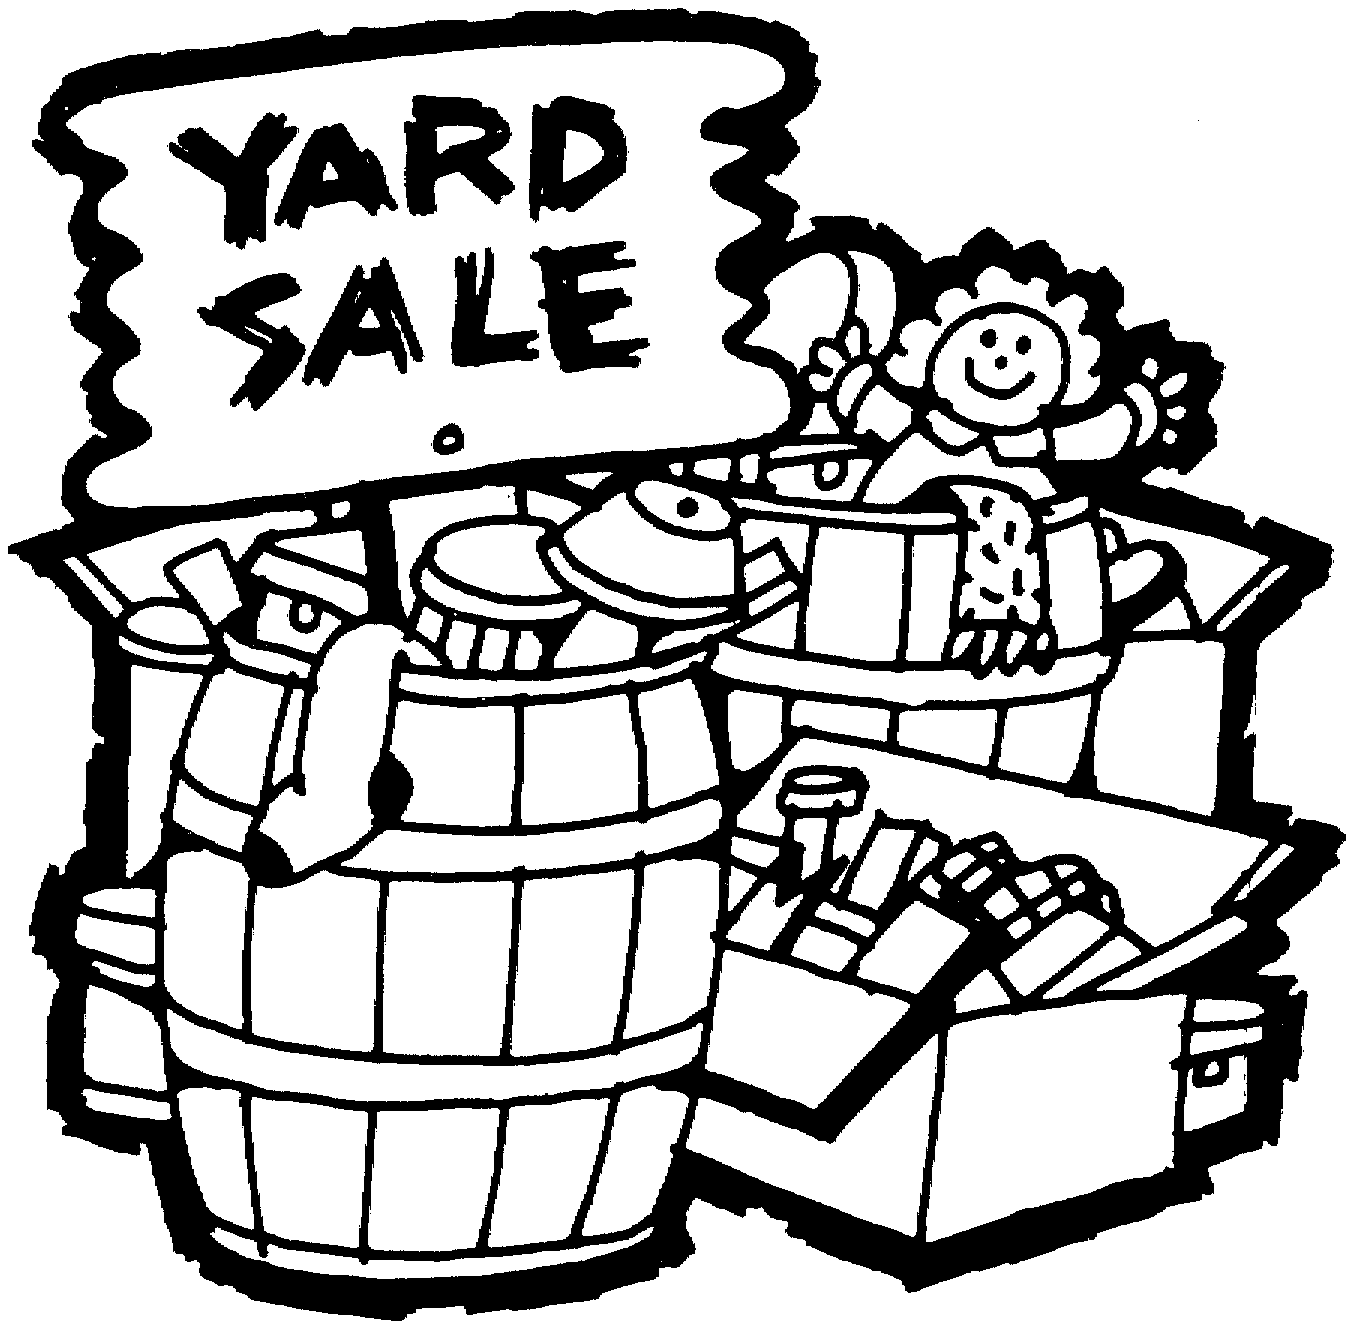 Awesome Yard Sale Signs Summer Madness Sale 2012 At